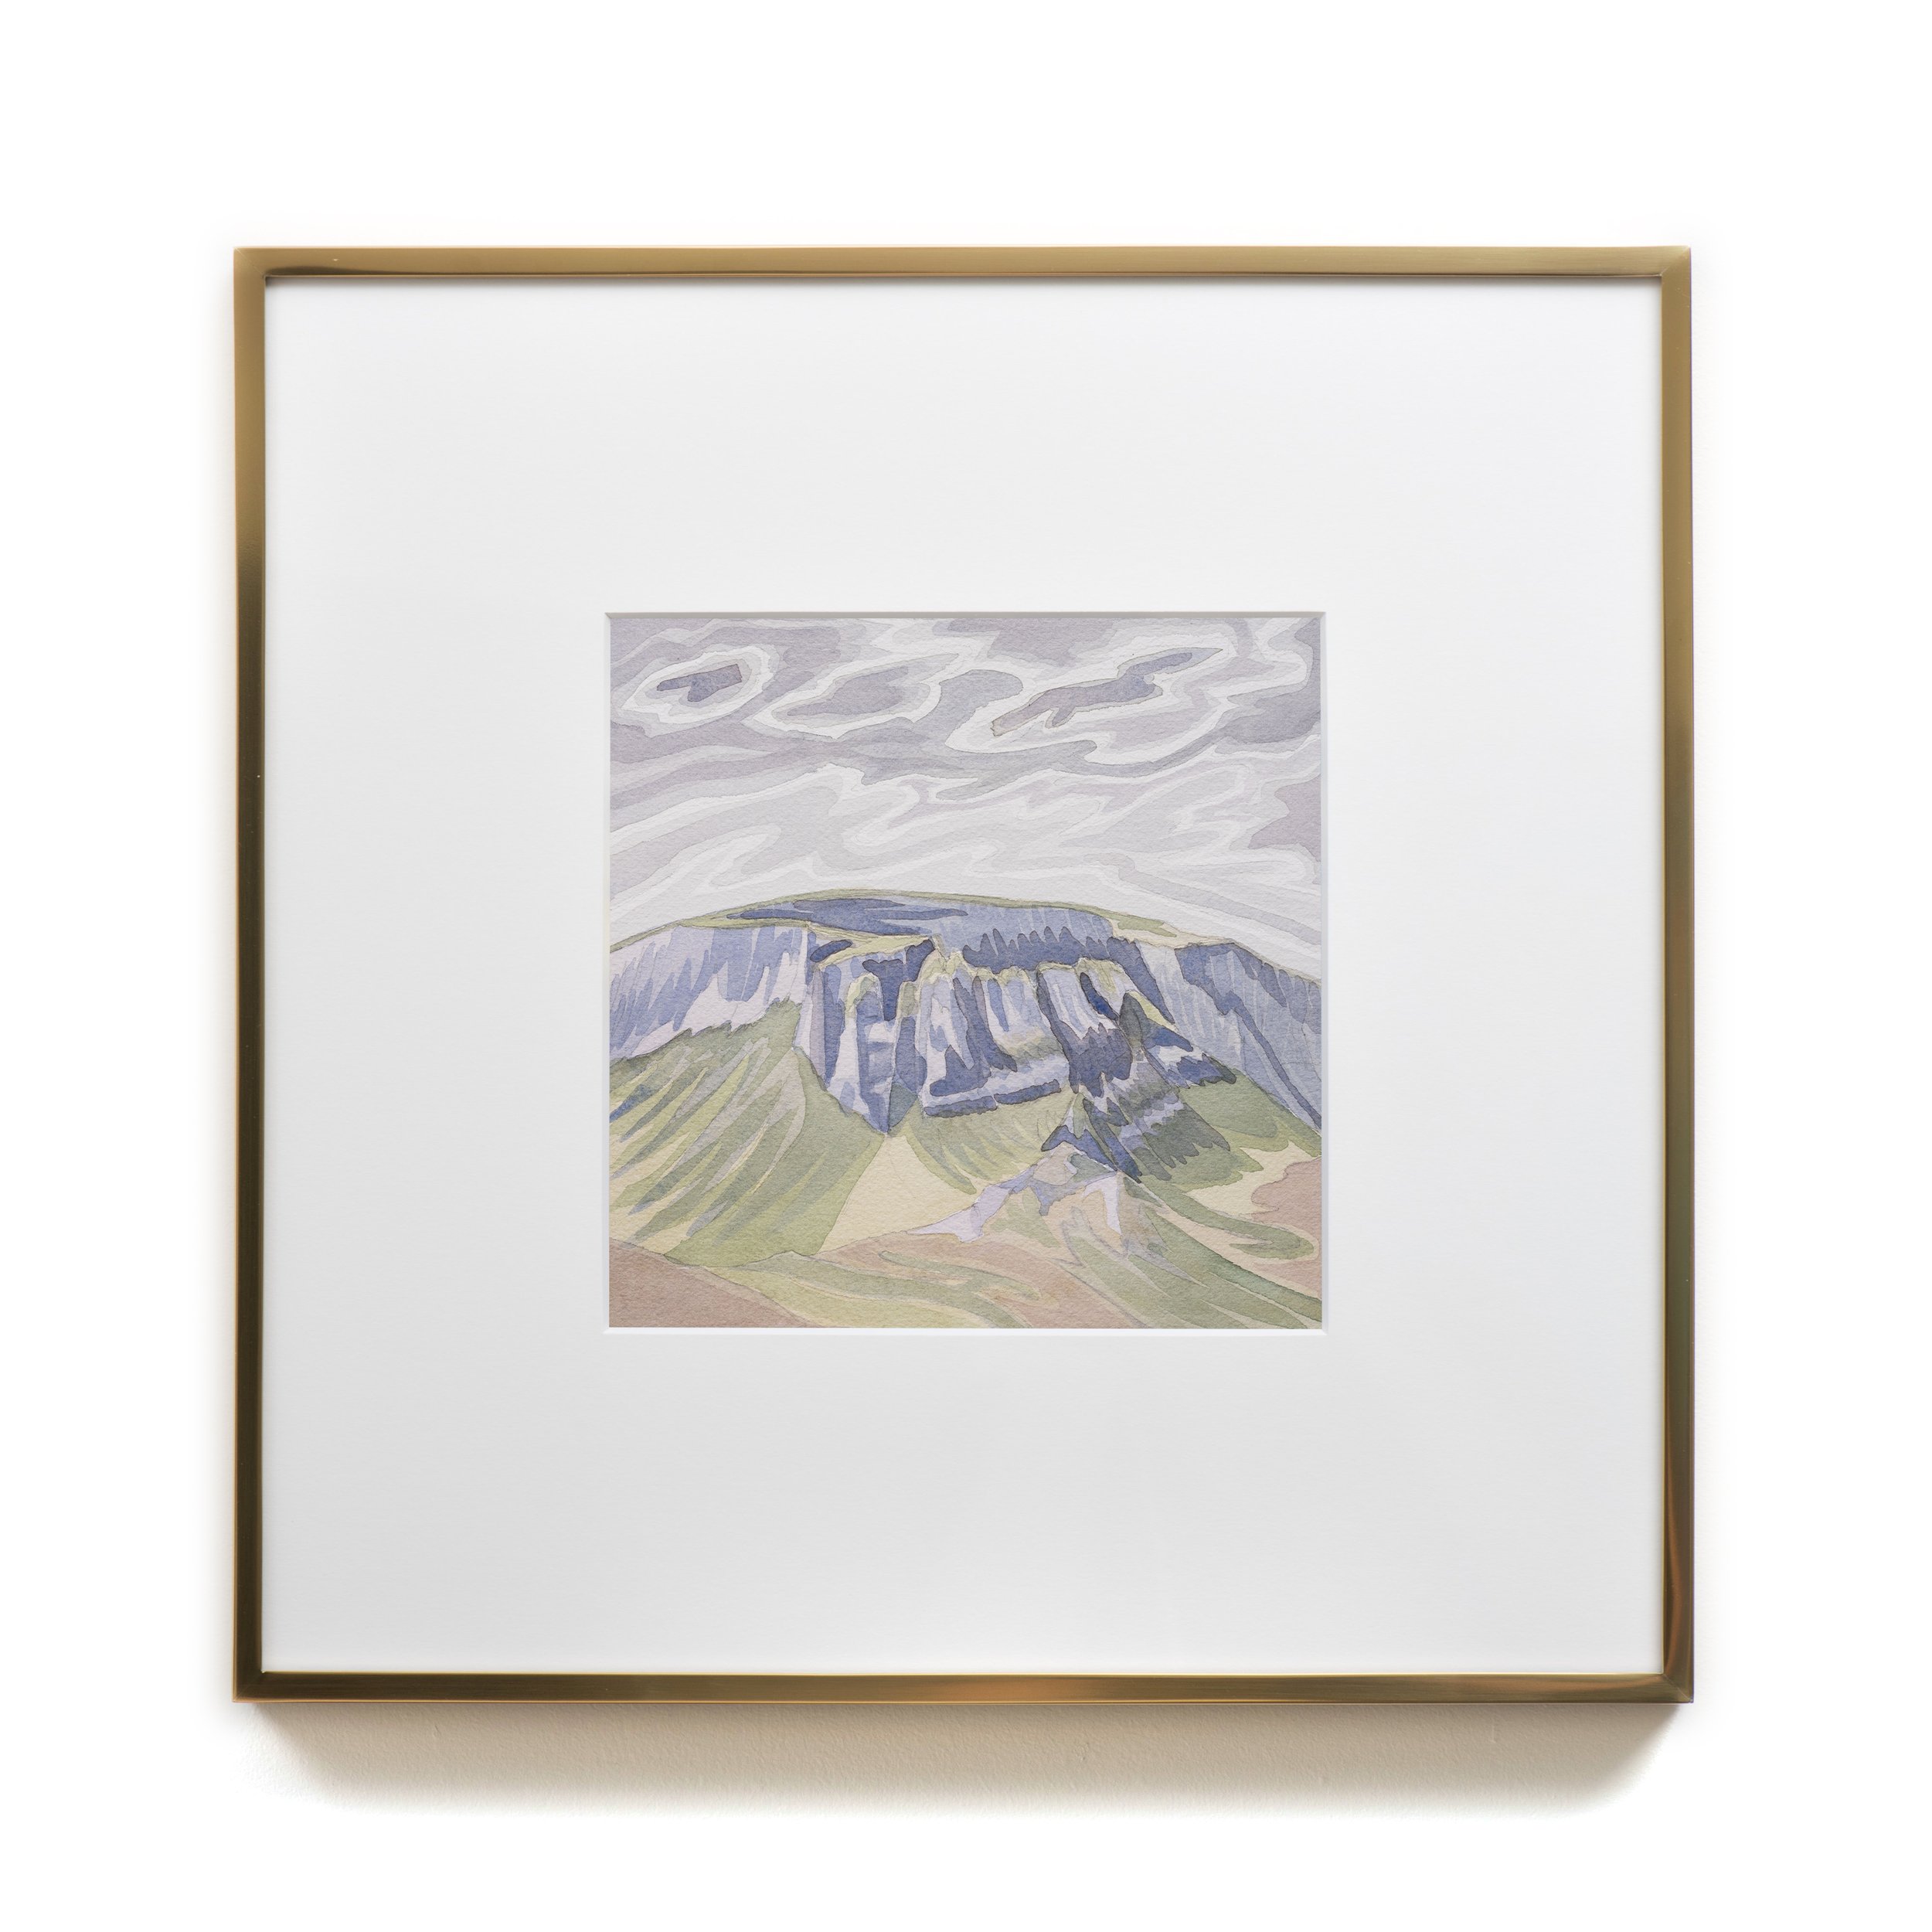   Quiraing , 2022 Watercolor on paper 16 x 16 x 1 1/2 inches (framed) 